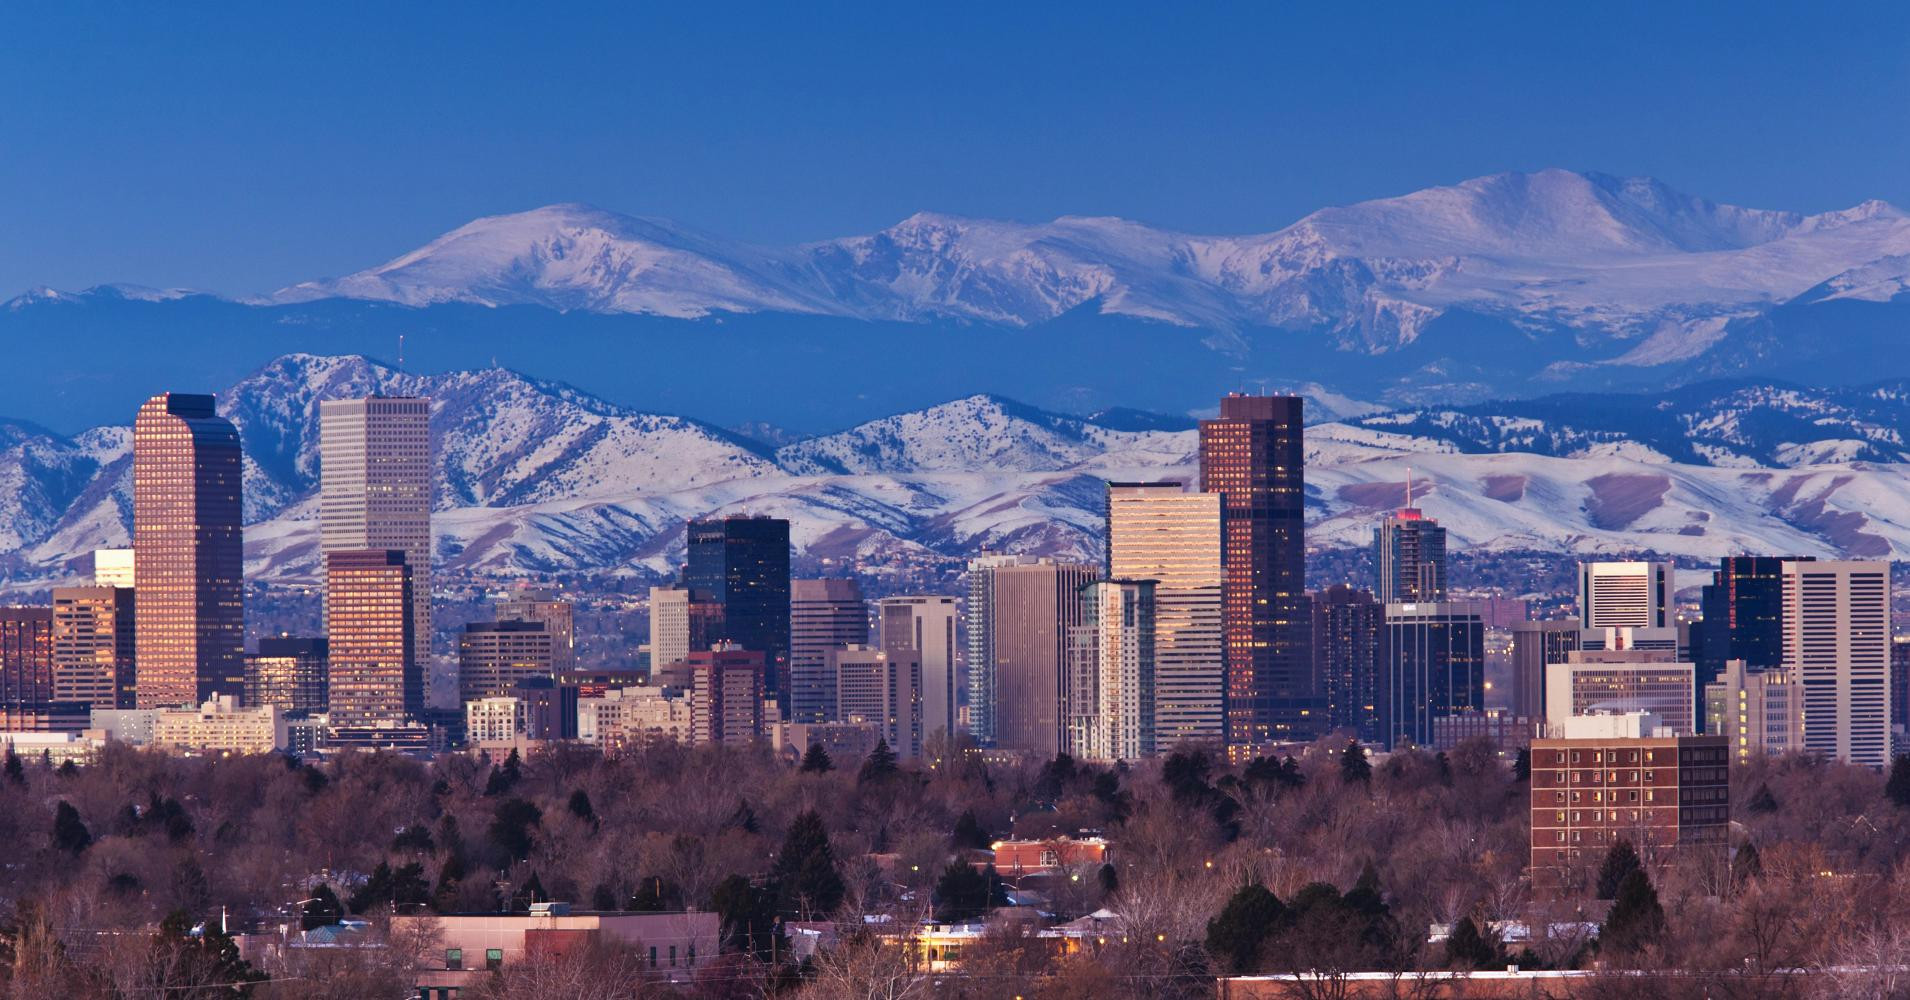 Potential host Denver claim can stage financially sustainable Winter Olympics if chosen for 2030